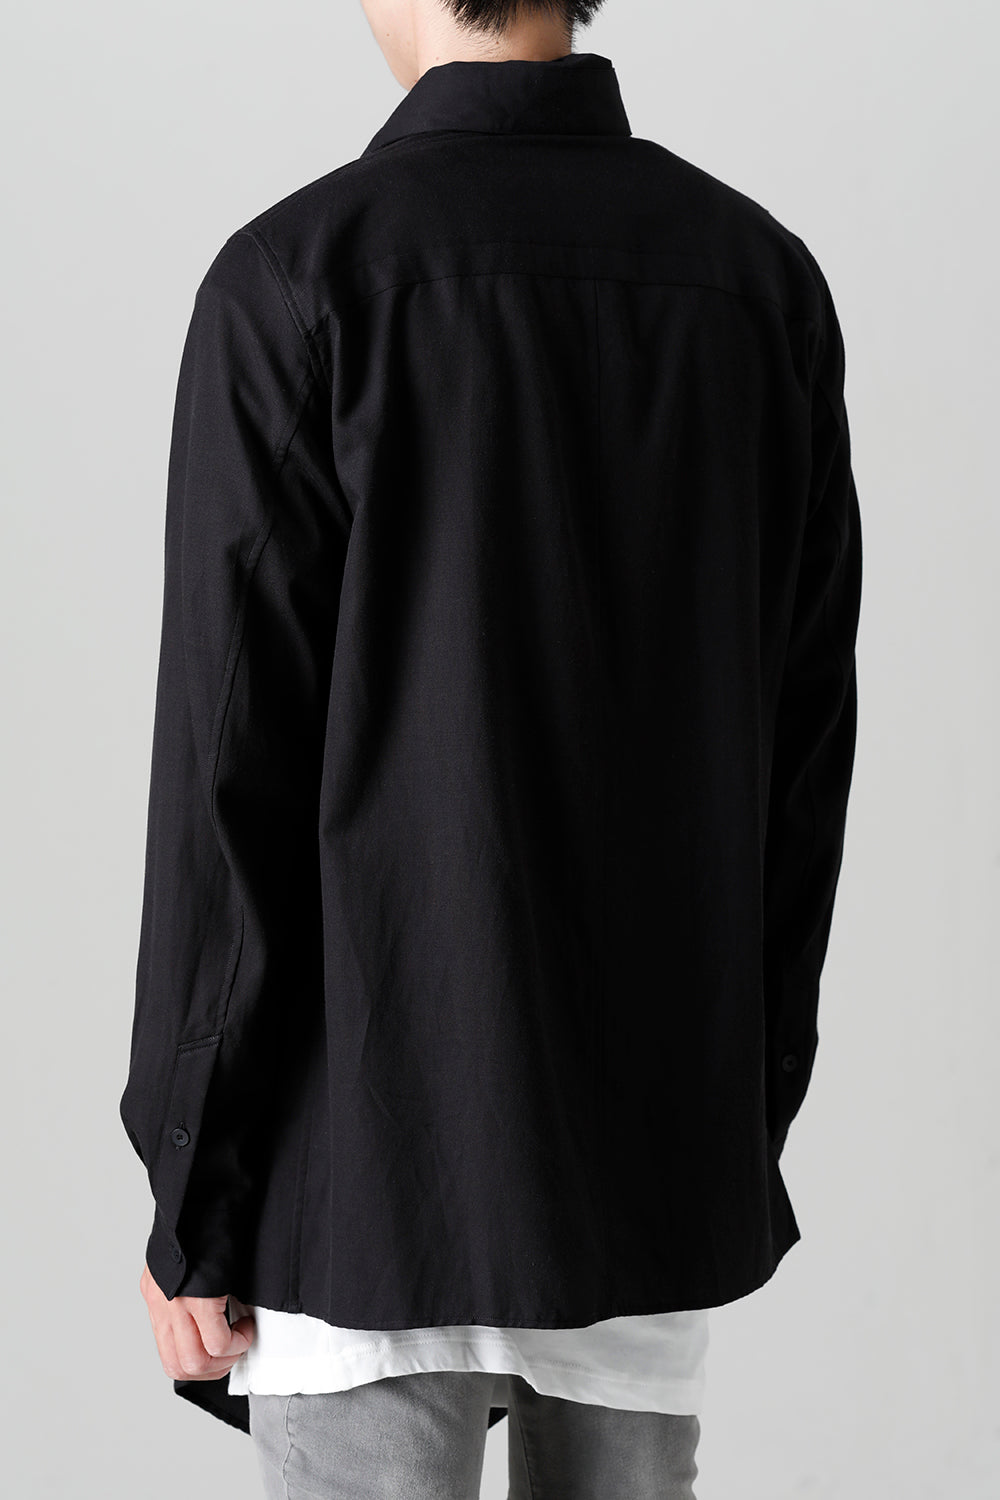 799SHM23 | Covered Shirt | JULIUS | Online Store - FASCINATE THE R